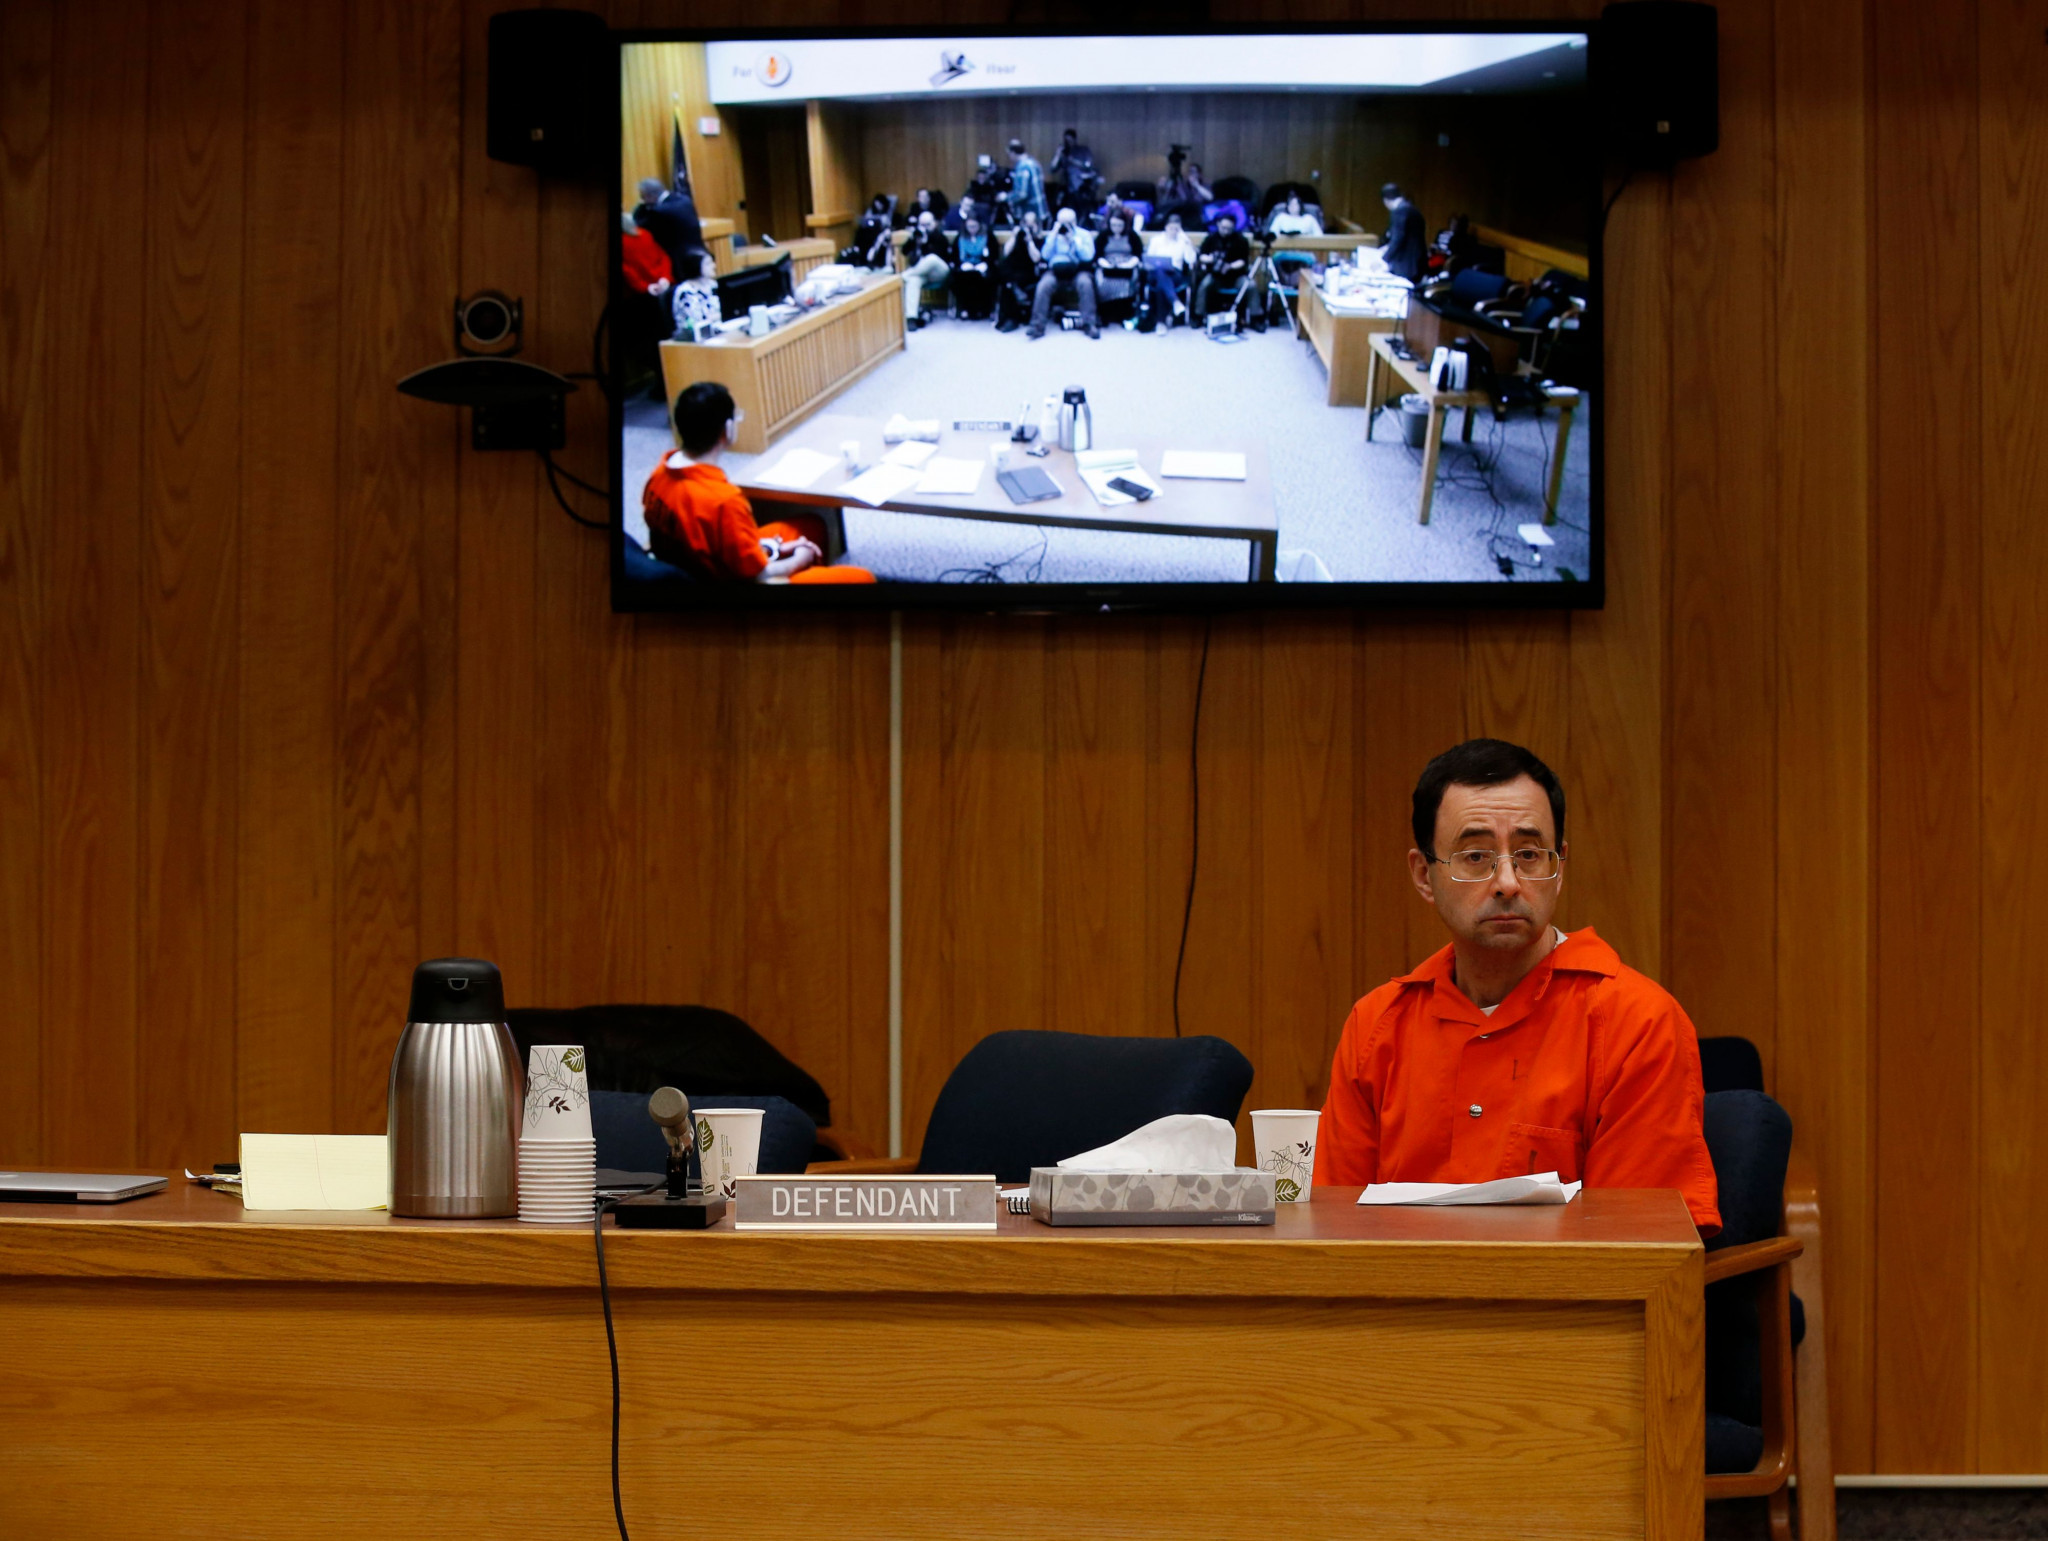 Former United States women's gymnastics team doctor Larry Nassar was able to get away with multiple cases of abuse due to governance failures by USA Gymnastics ©Getty Images